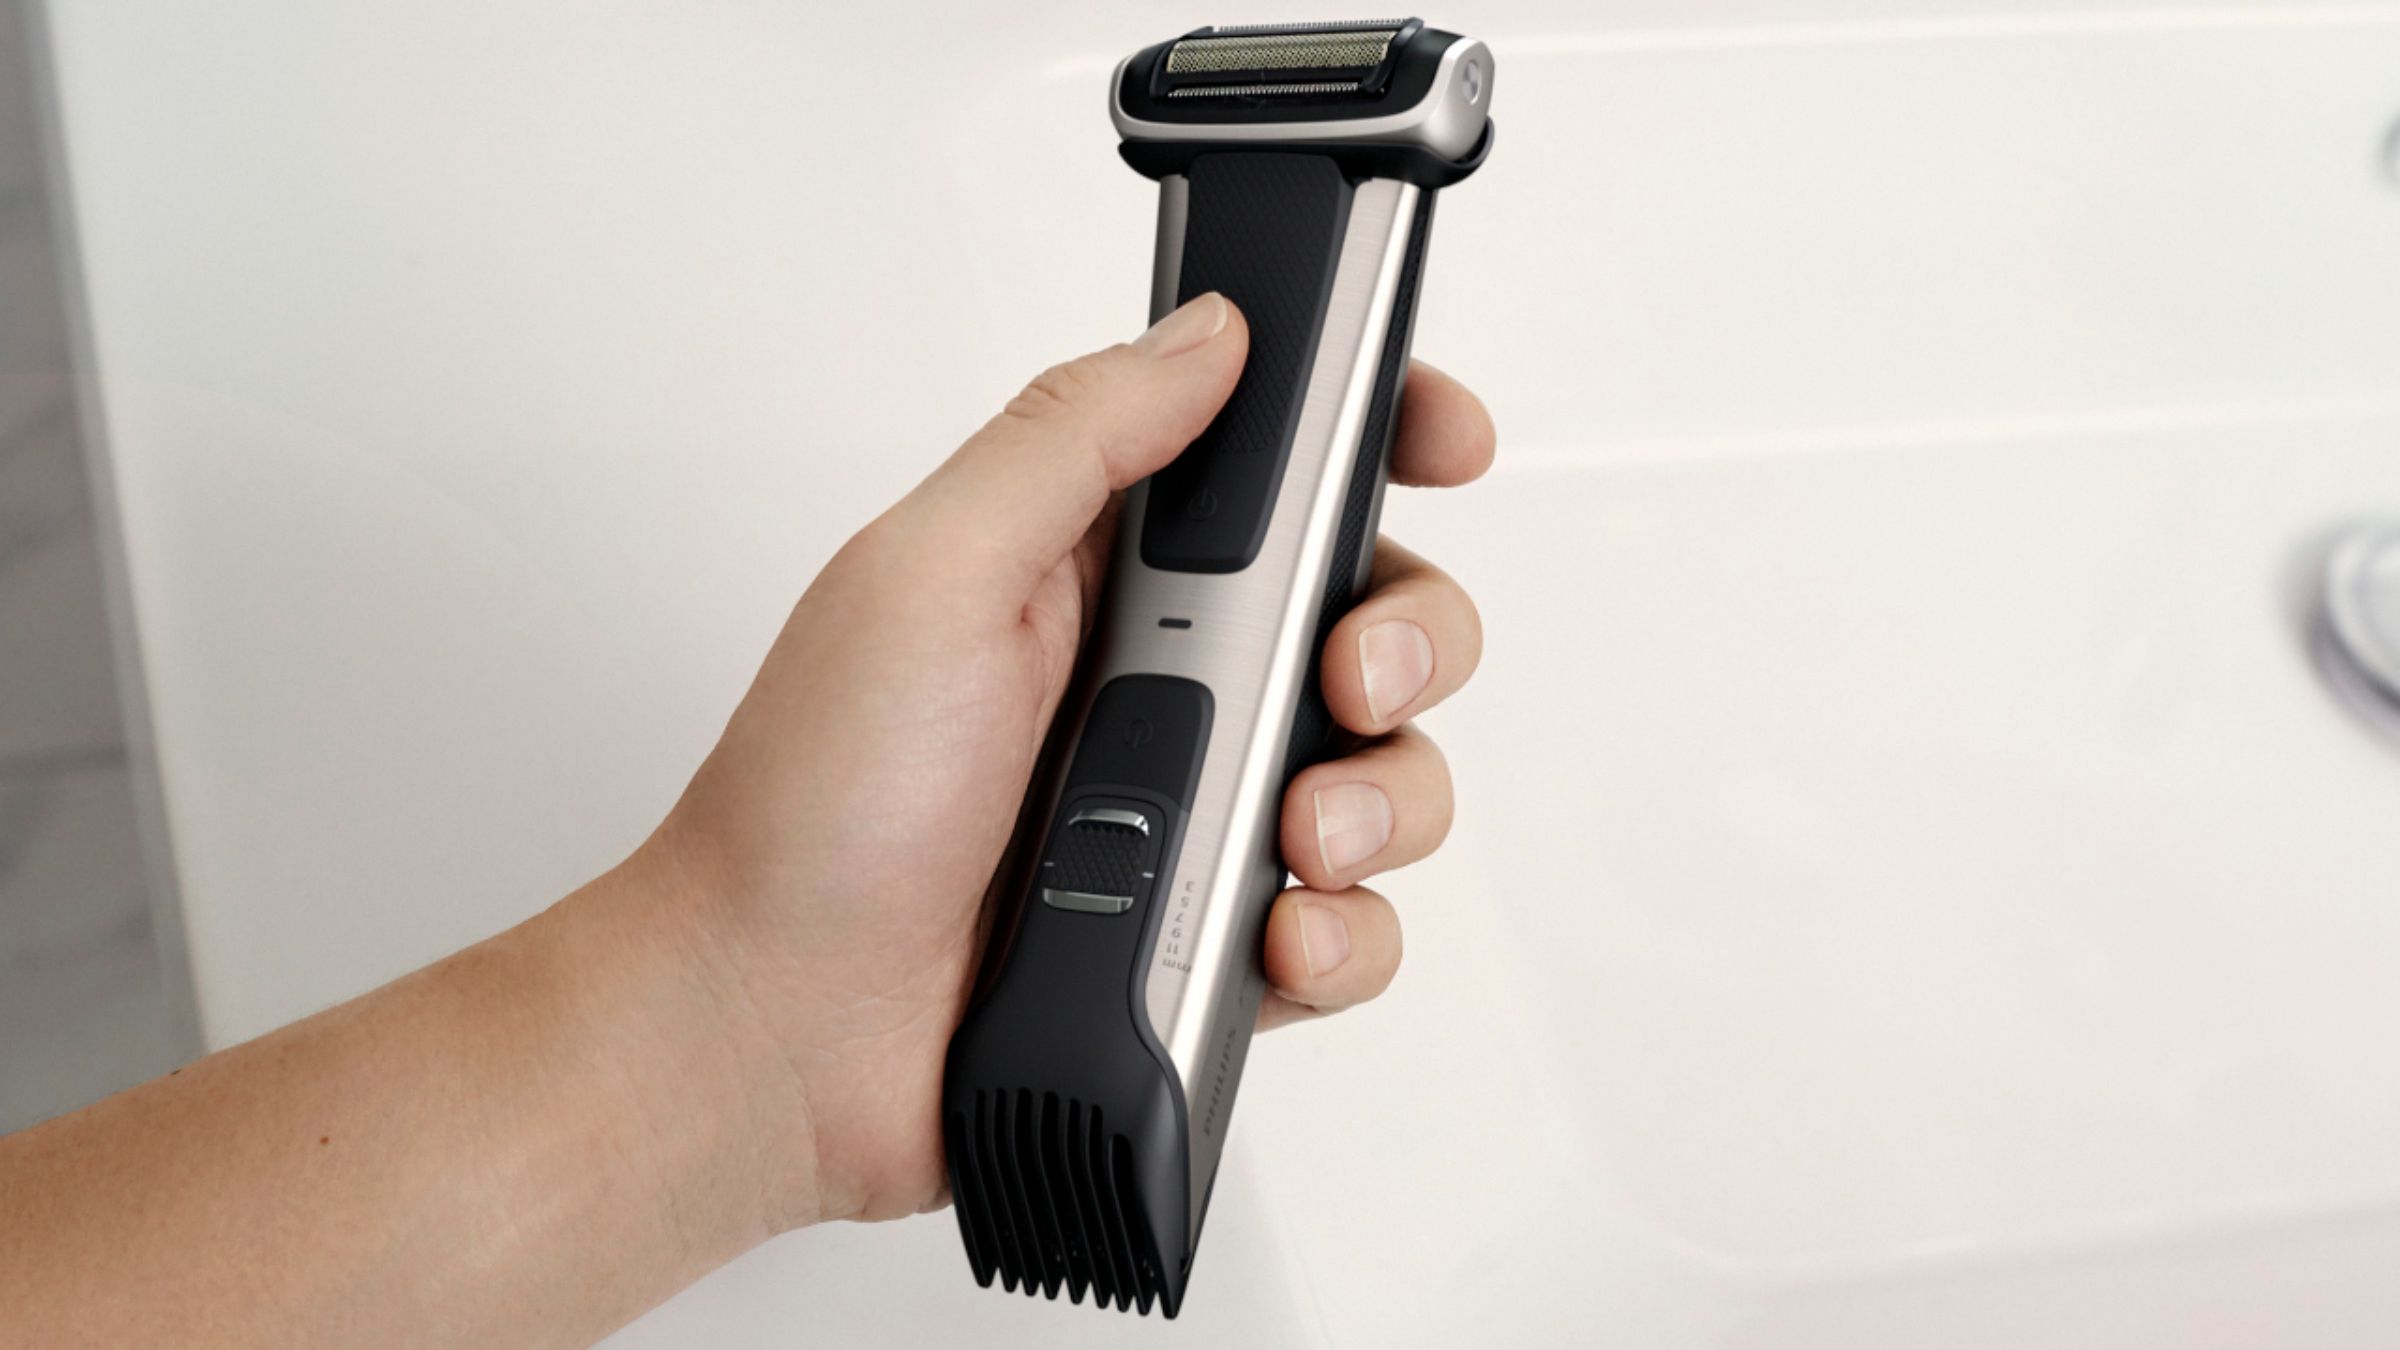 body hair trimmer philips